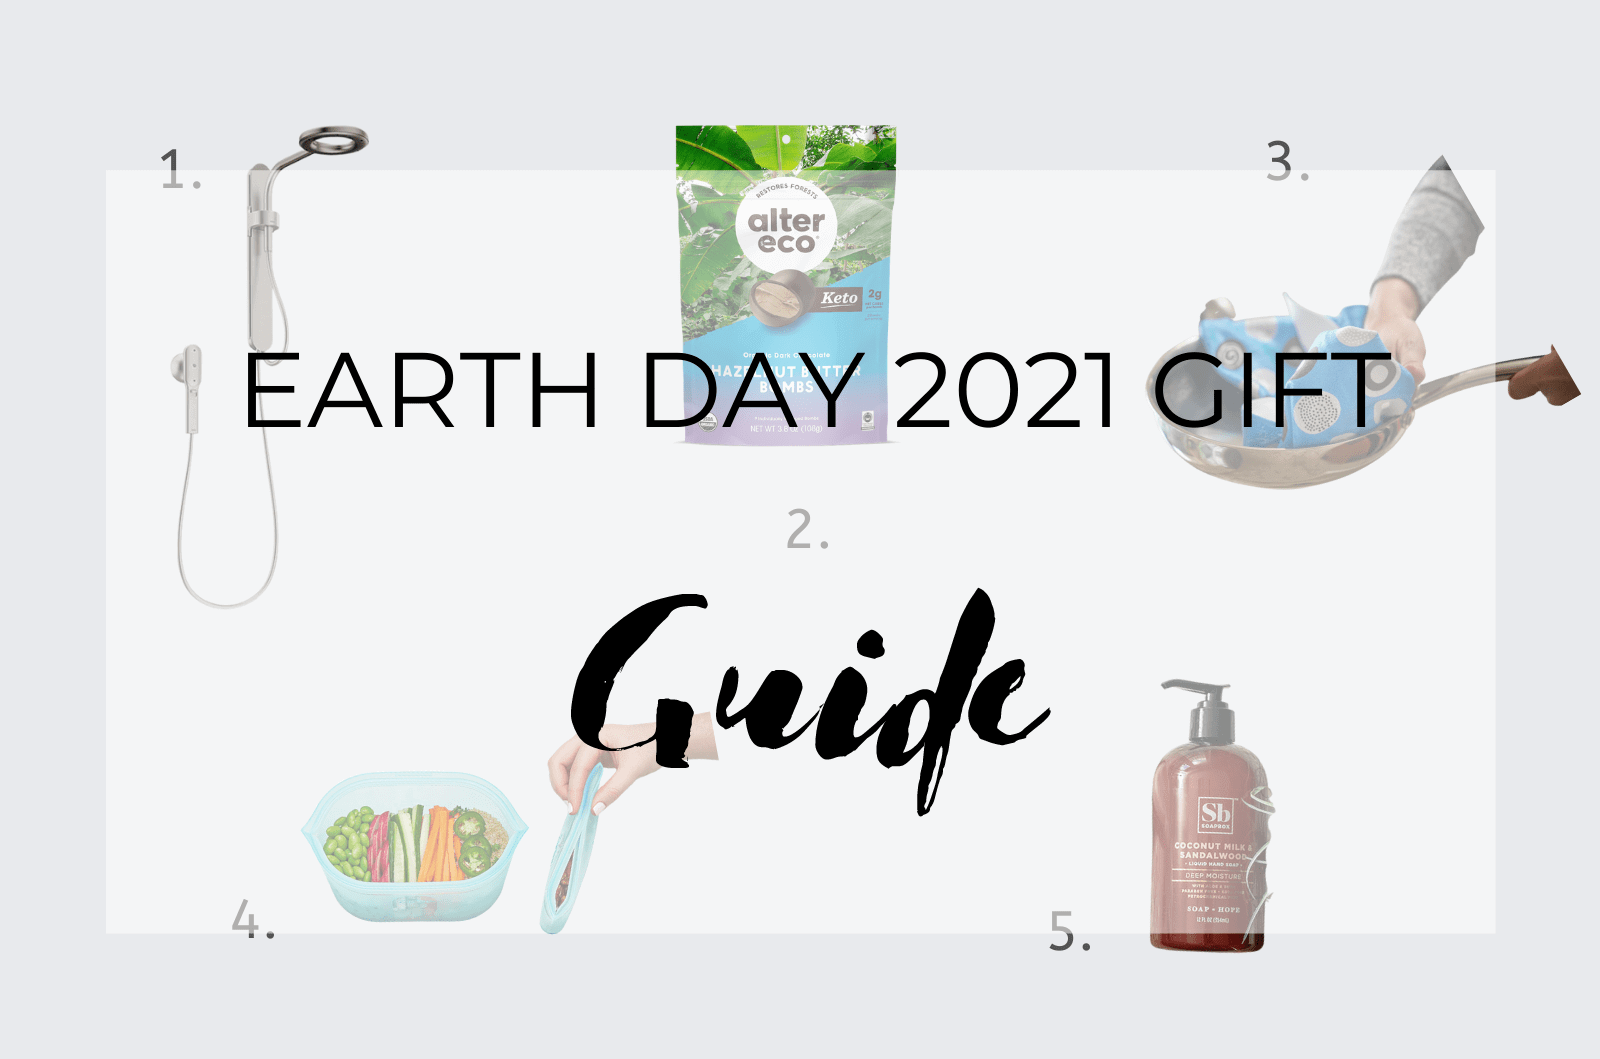 Earth Day 2021 Gift Guide